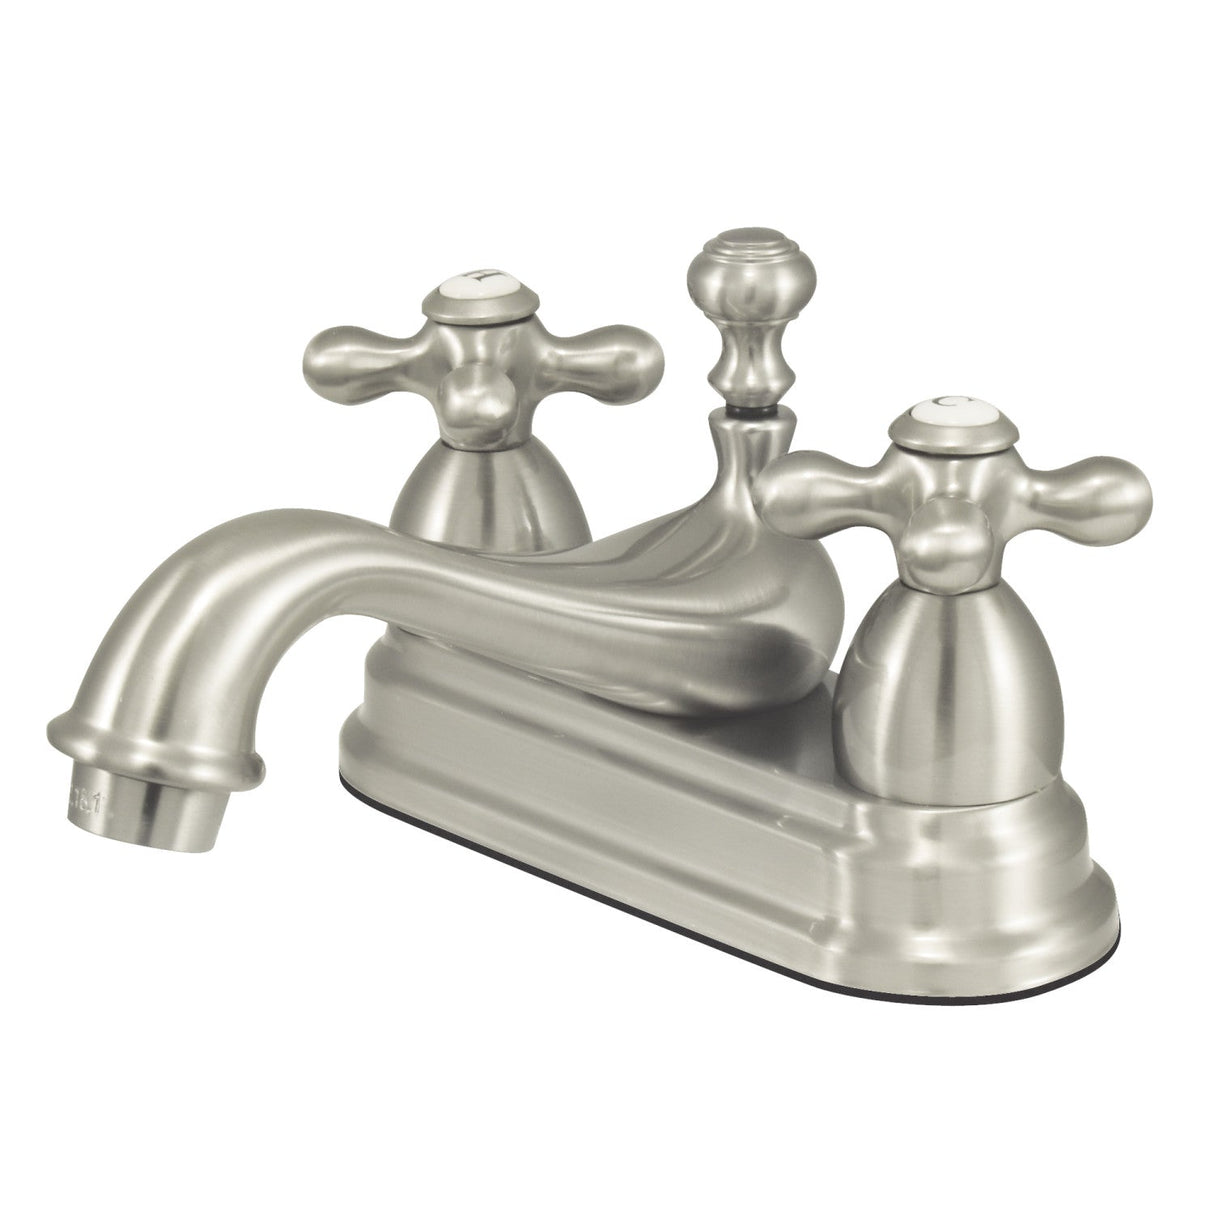 Restoration KS3608AX Two-Handle 3-Hole Deck Mount 4" Centerset Bathroom Faucet with Brass Pop-Up, Brushed Nickel